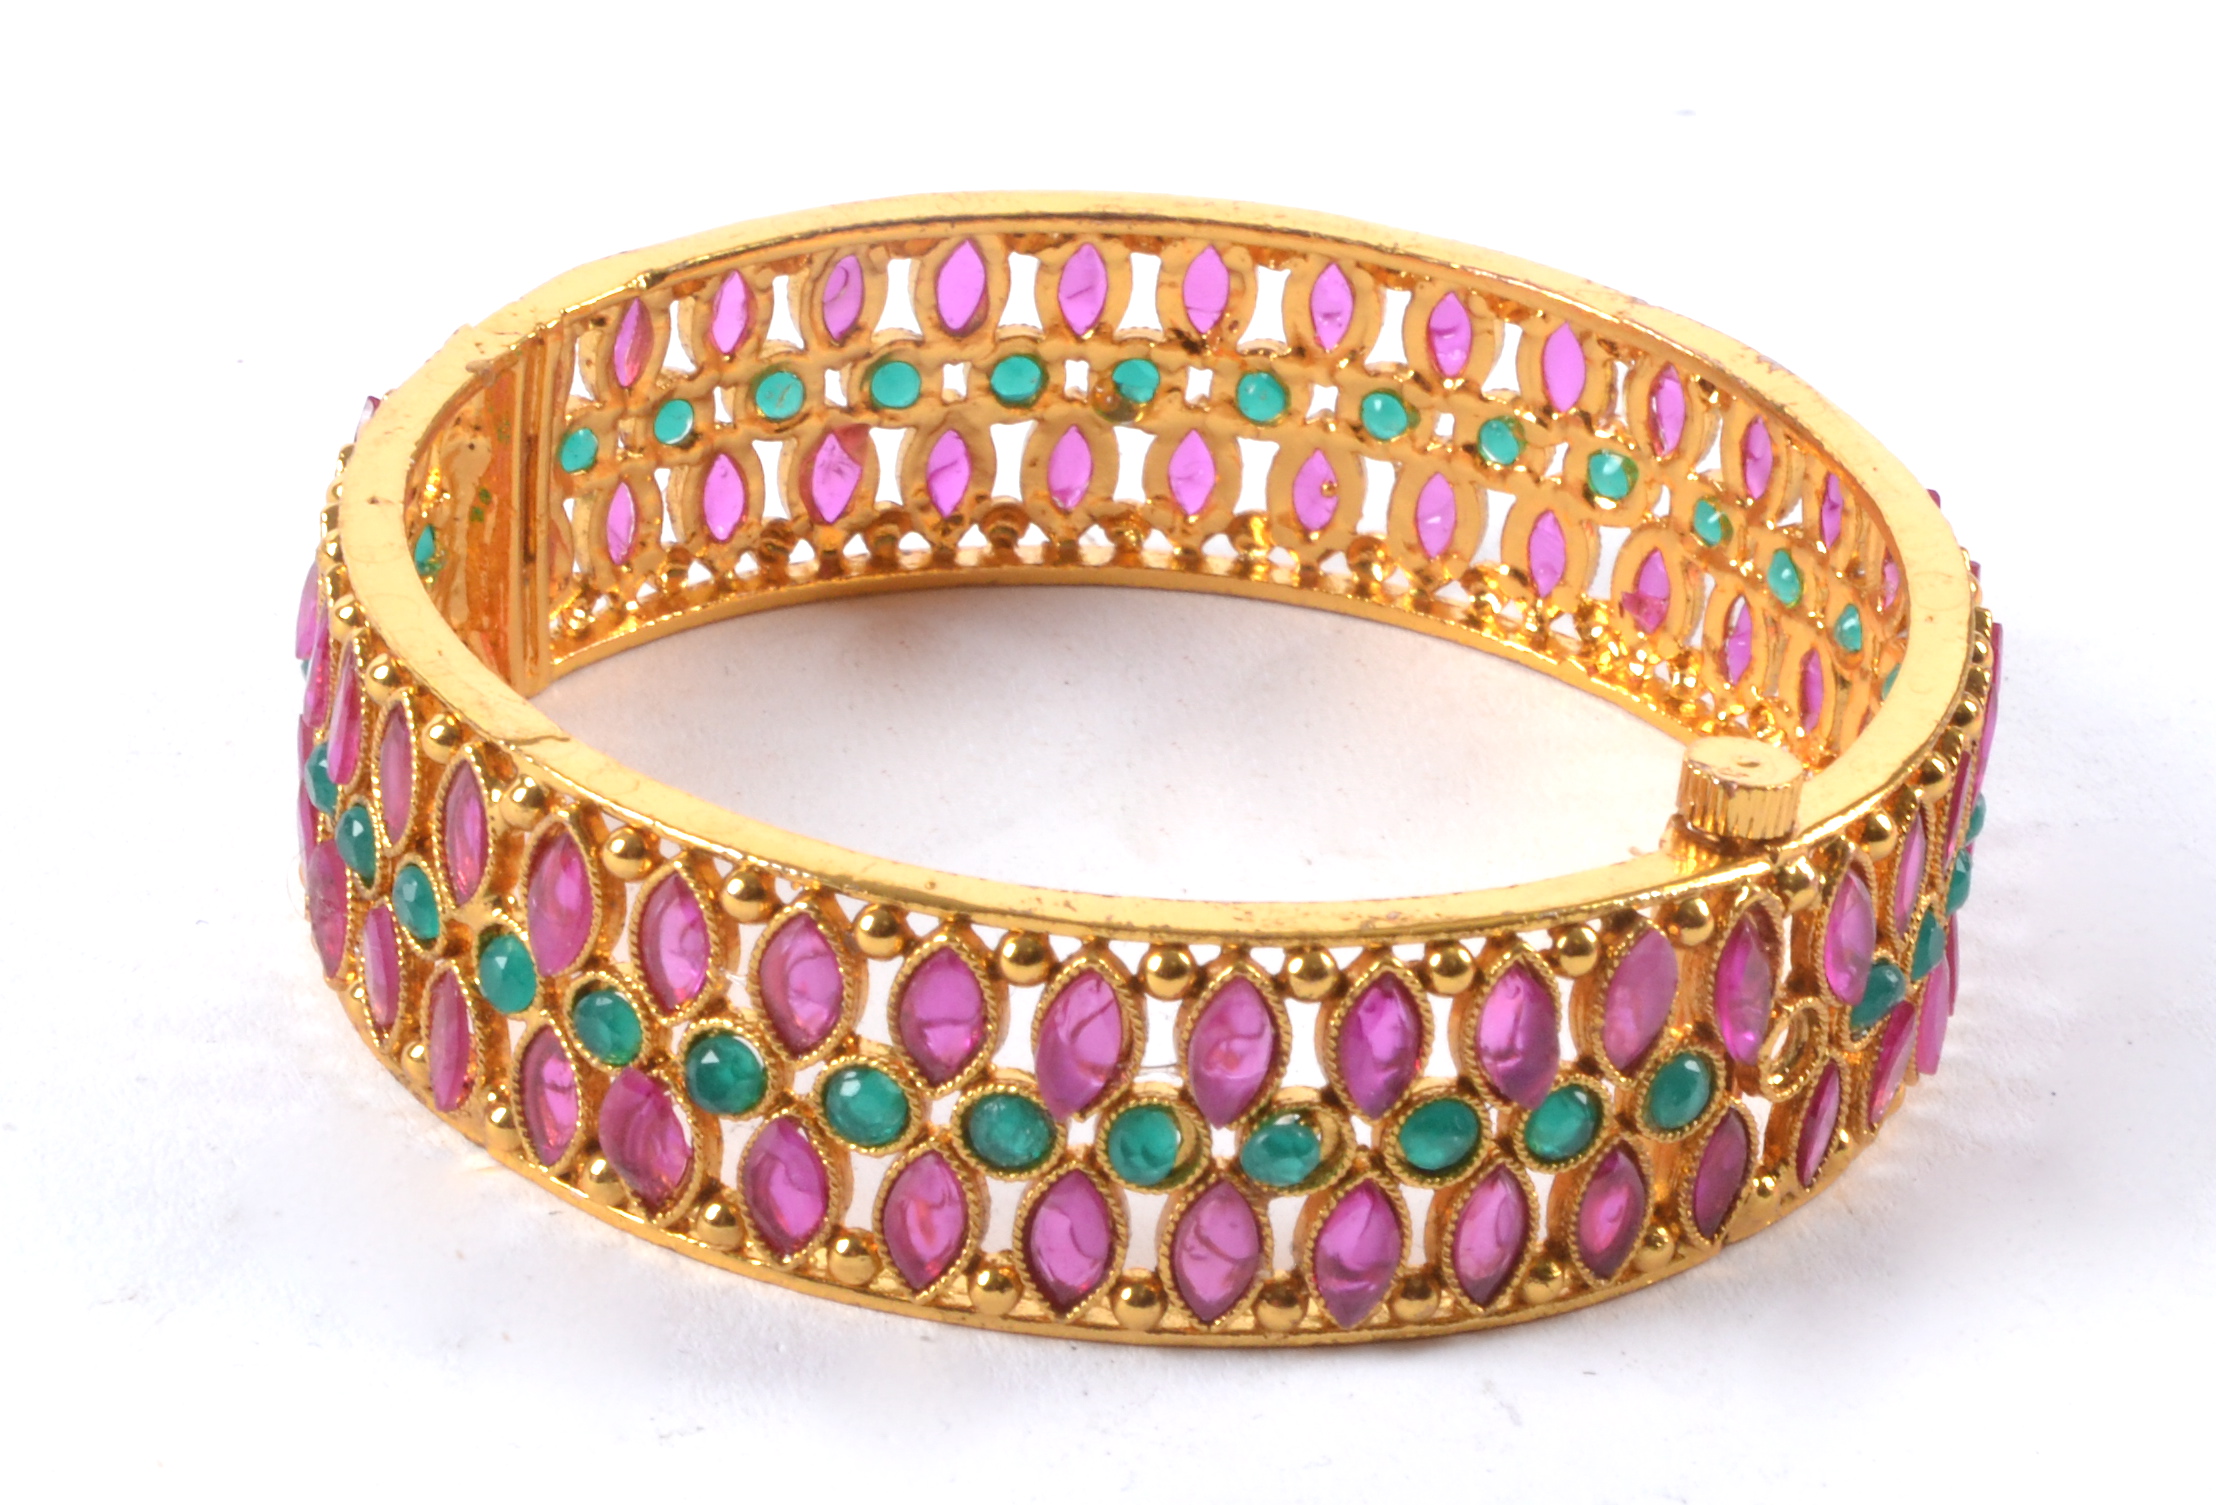 A decorative gilt bangle with semi precious red and green stones in the manner of rubies and